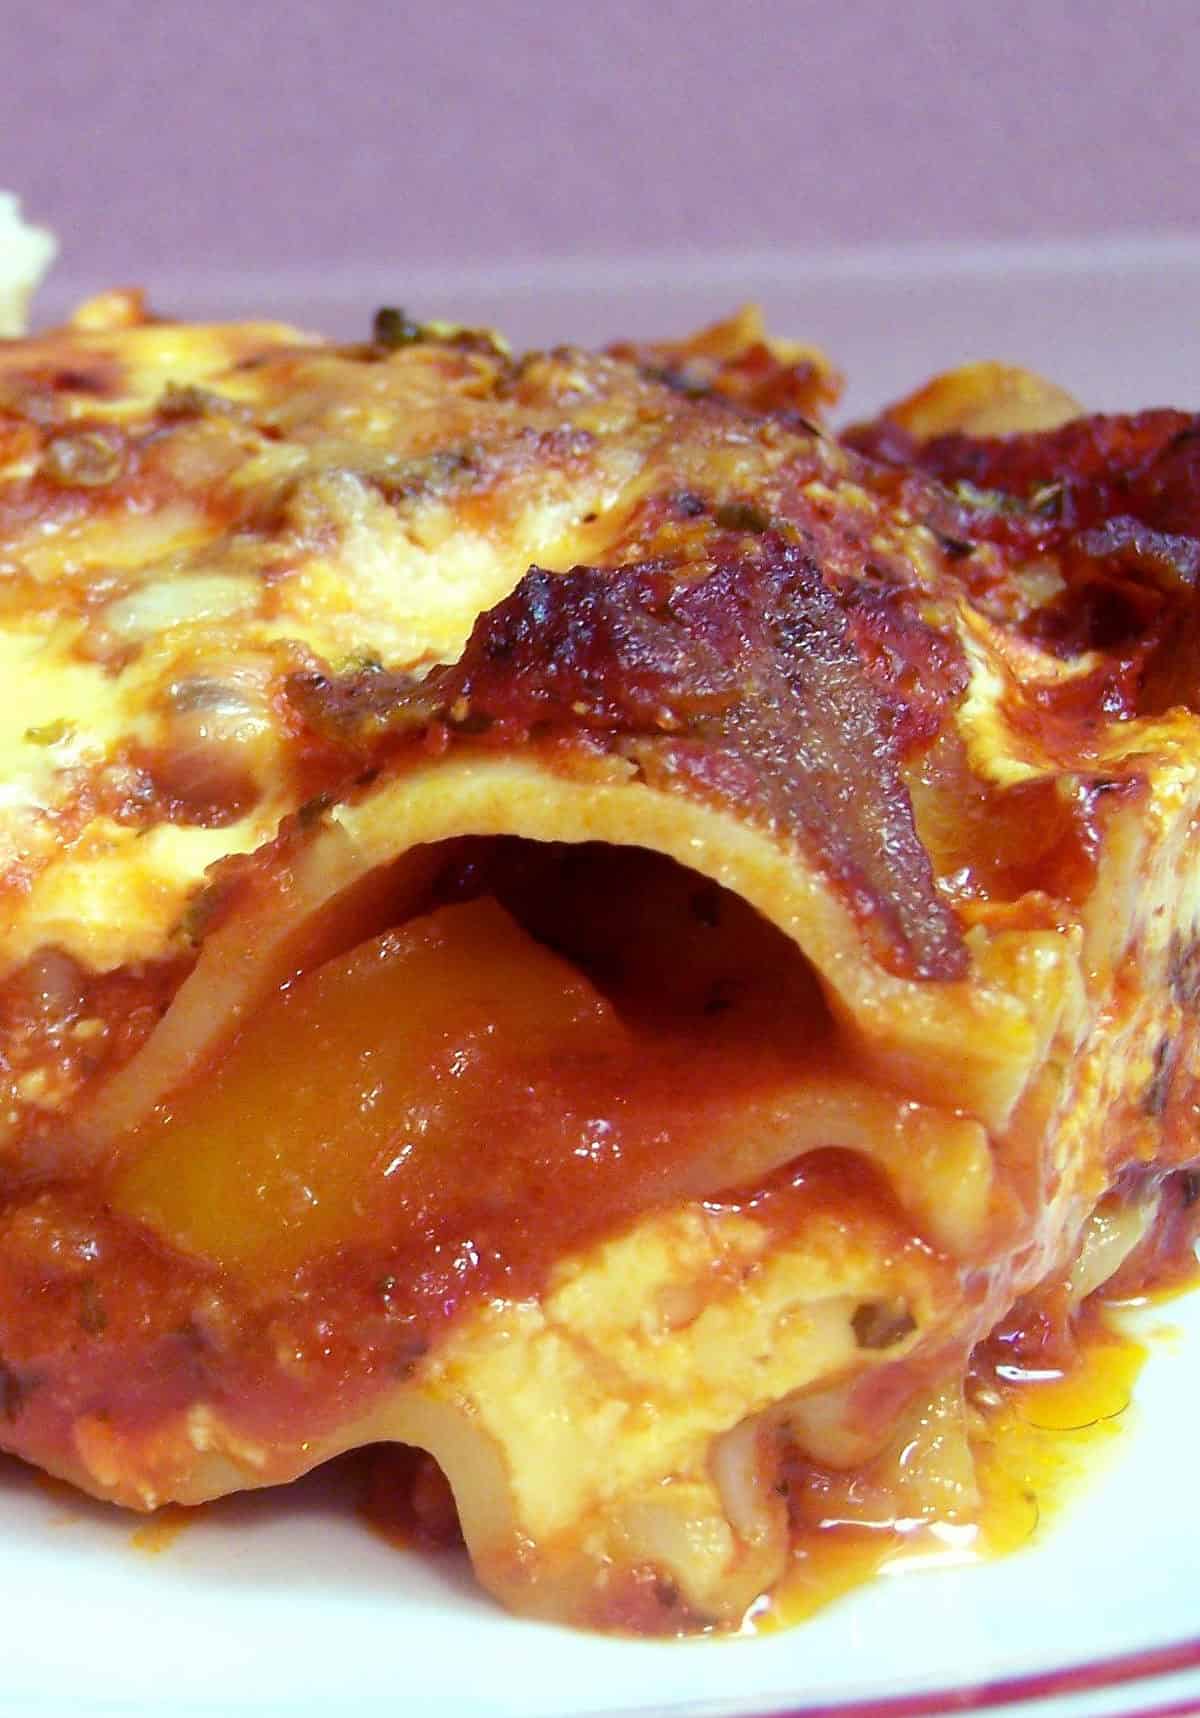  The perfect blend of Italian and Philly flavors, this lasagna is a crowd-pleaser.